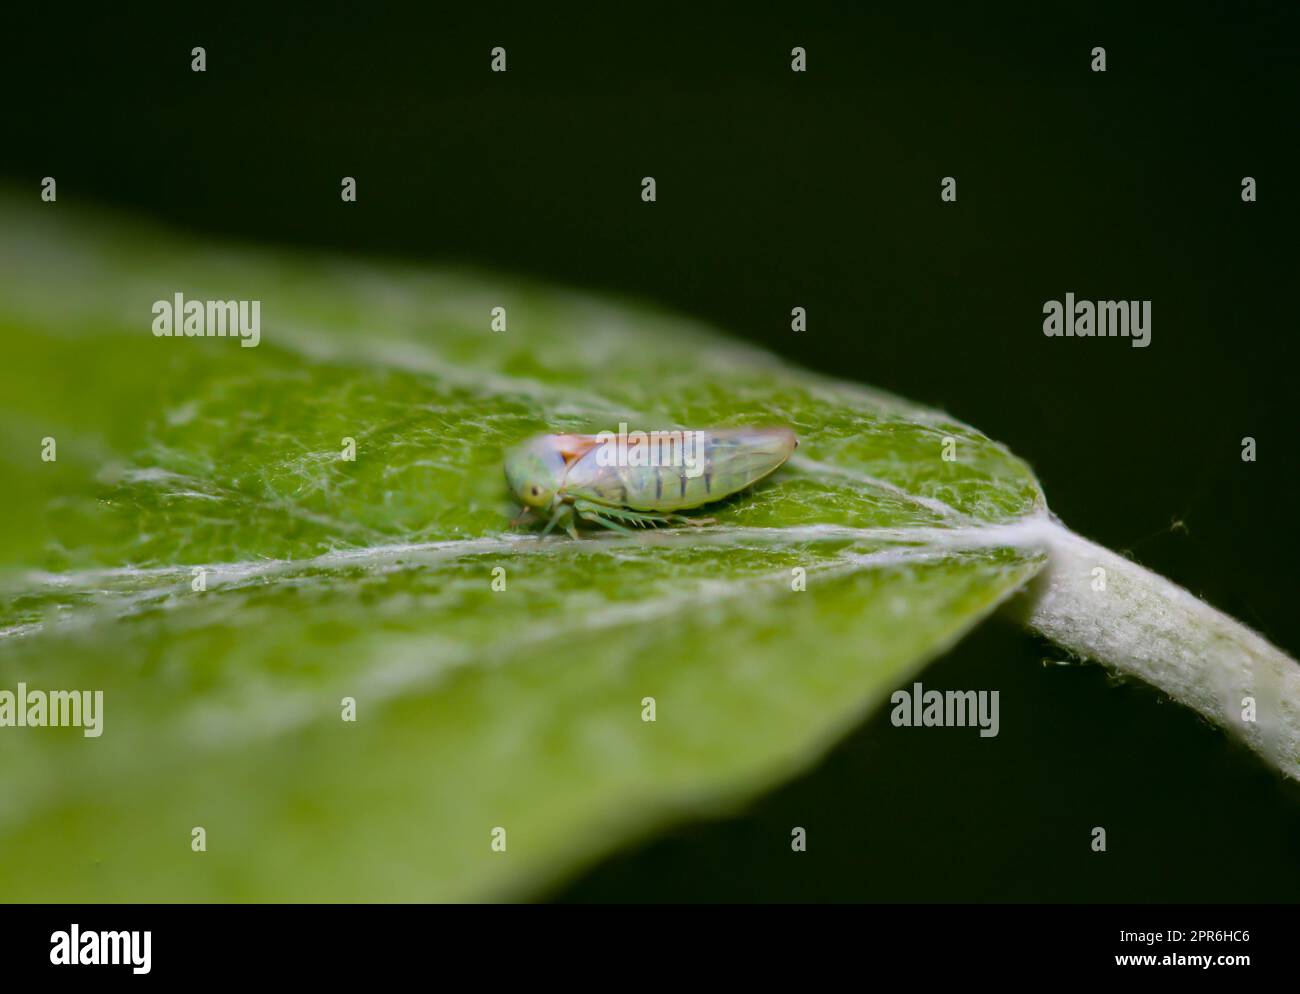 A small cicada on a leaf. Native to Germany. Close-up of a tiny Empoasca Species, a small green cicada. Stock Photo